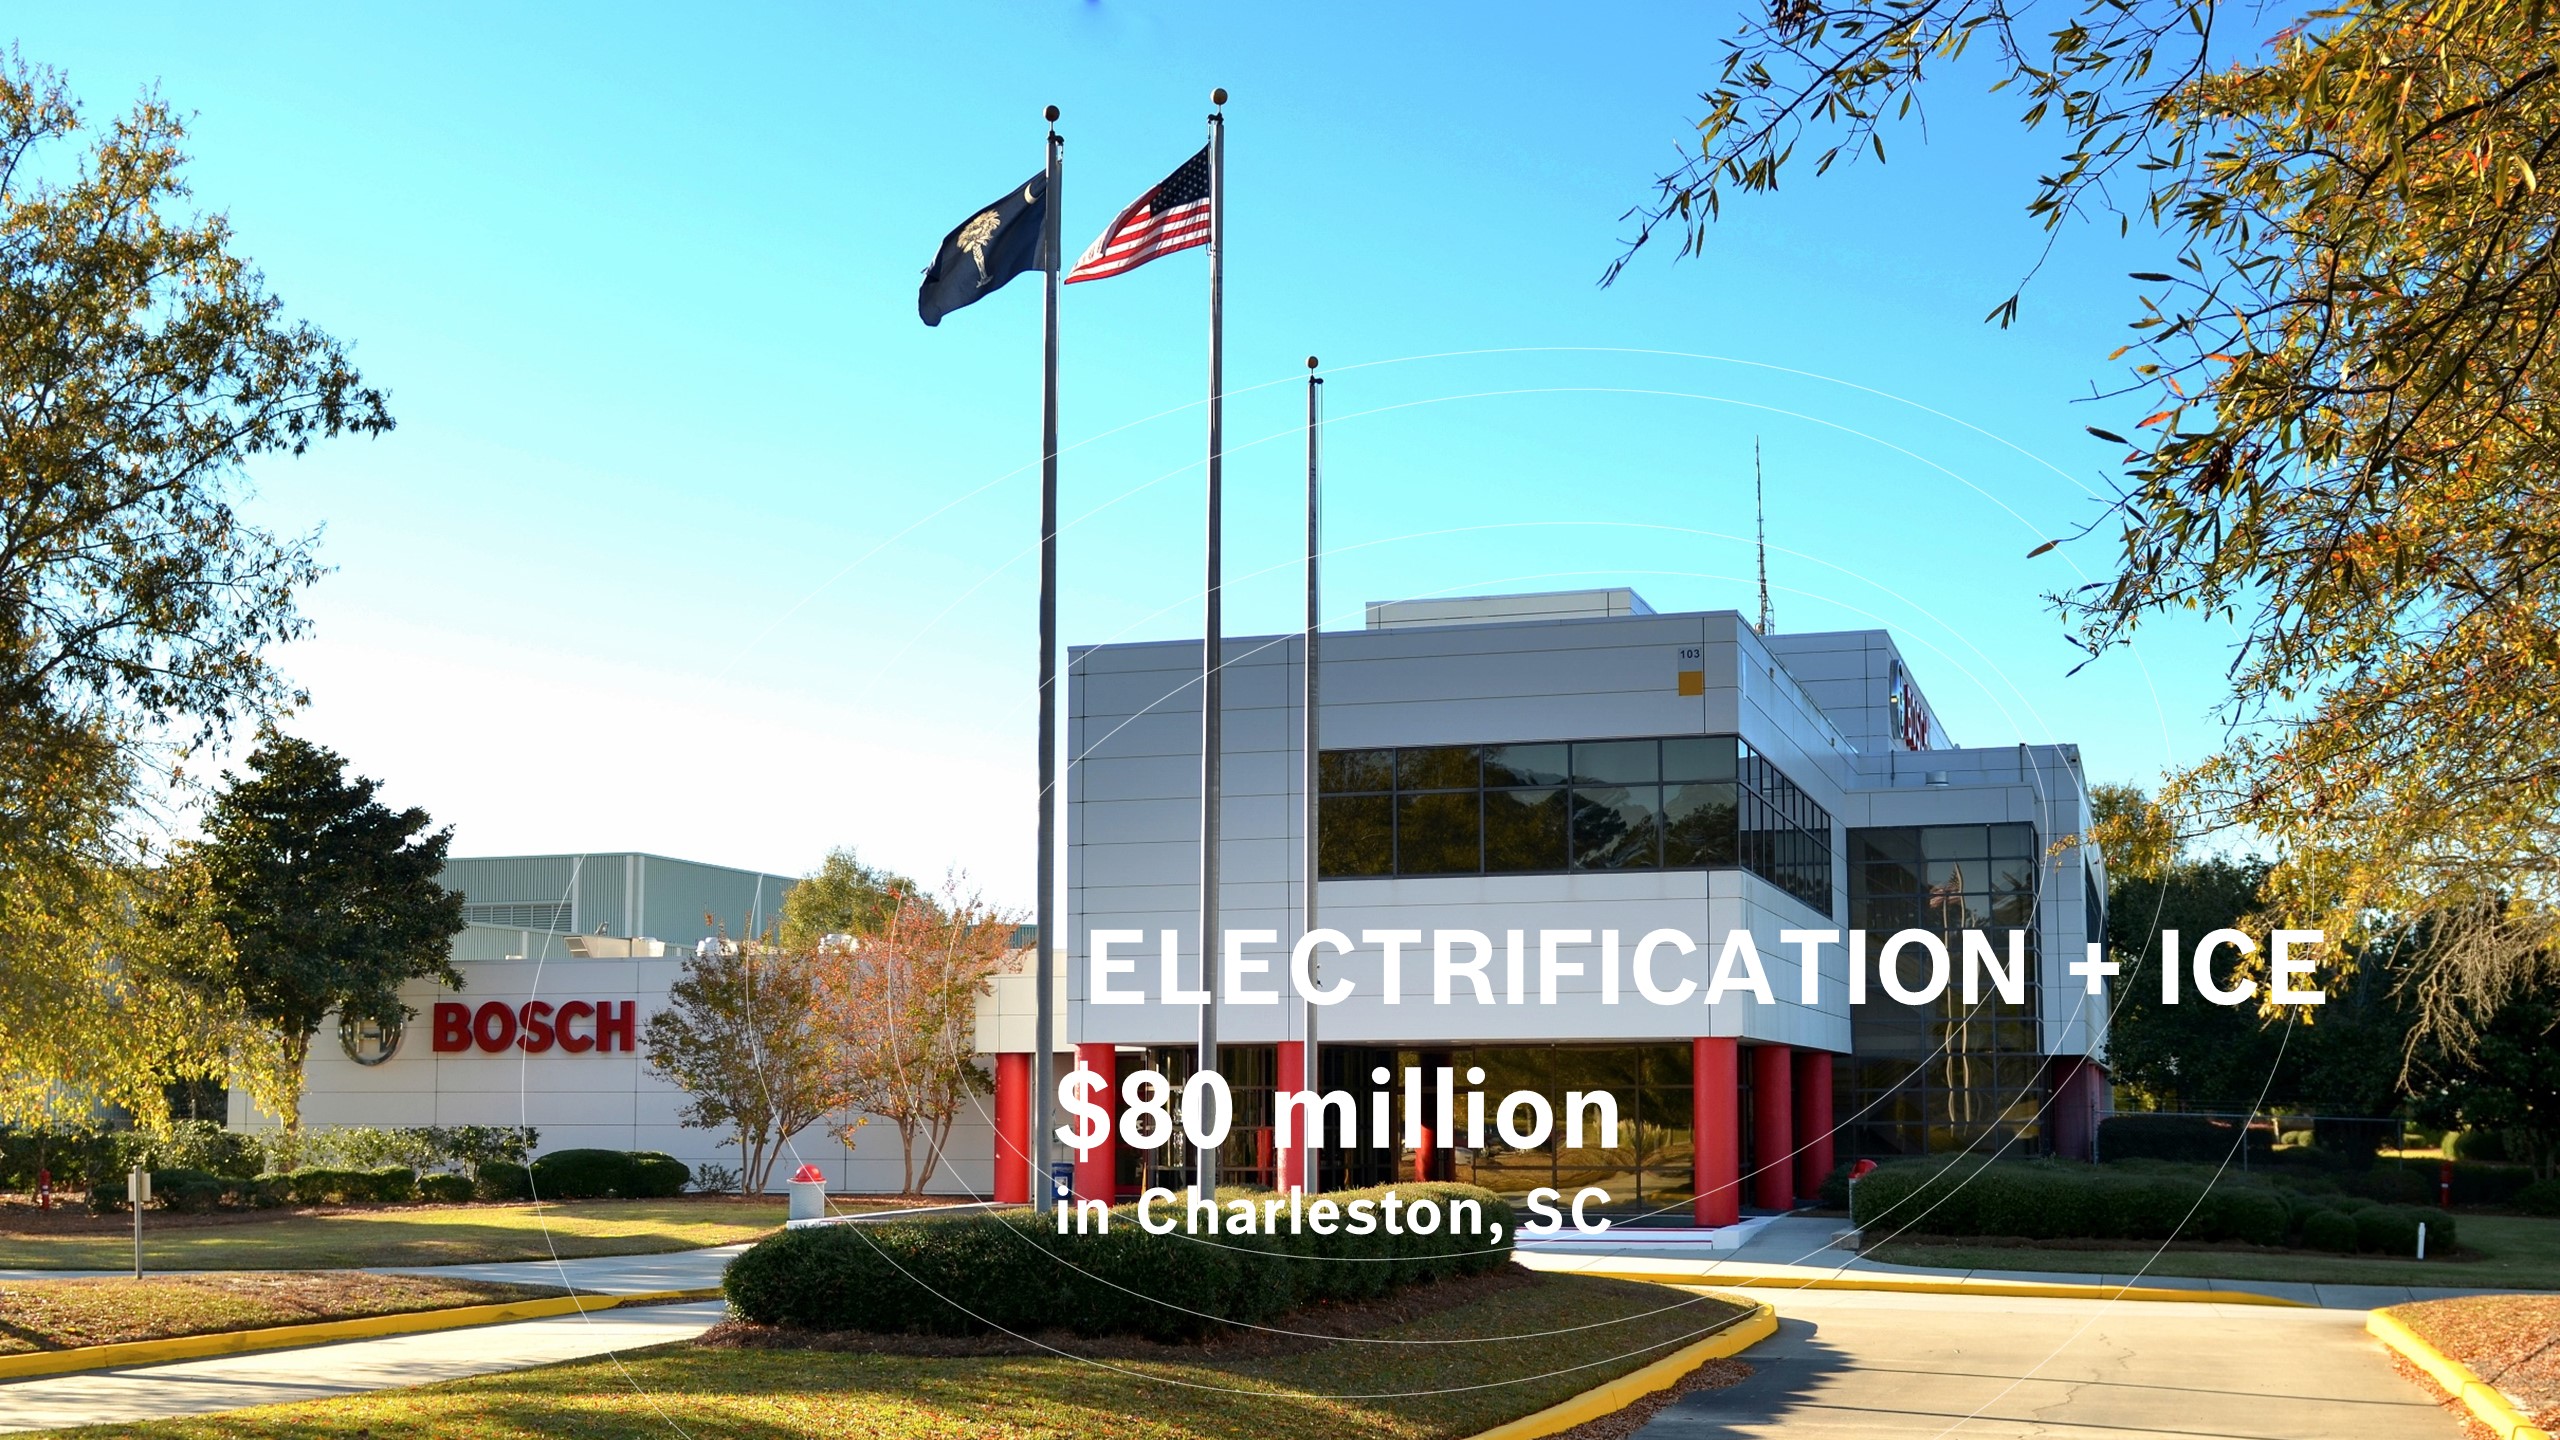 Between 2021 and 2023, Bosch will invest $80 million to support powertrain production for both electrification and internal combustion engine technology at its Charleston, South Carolina facility.